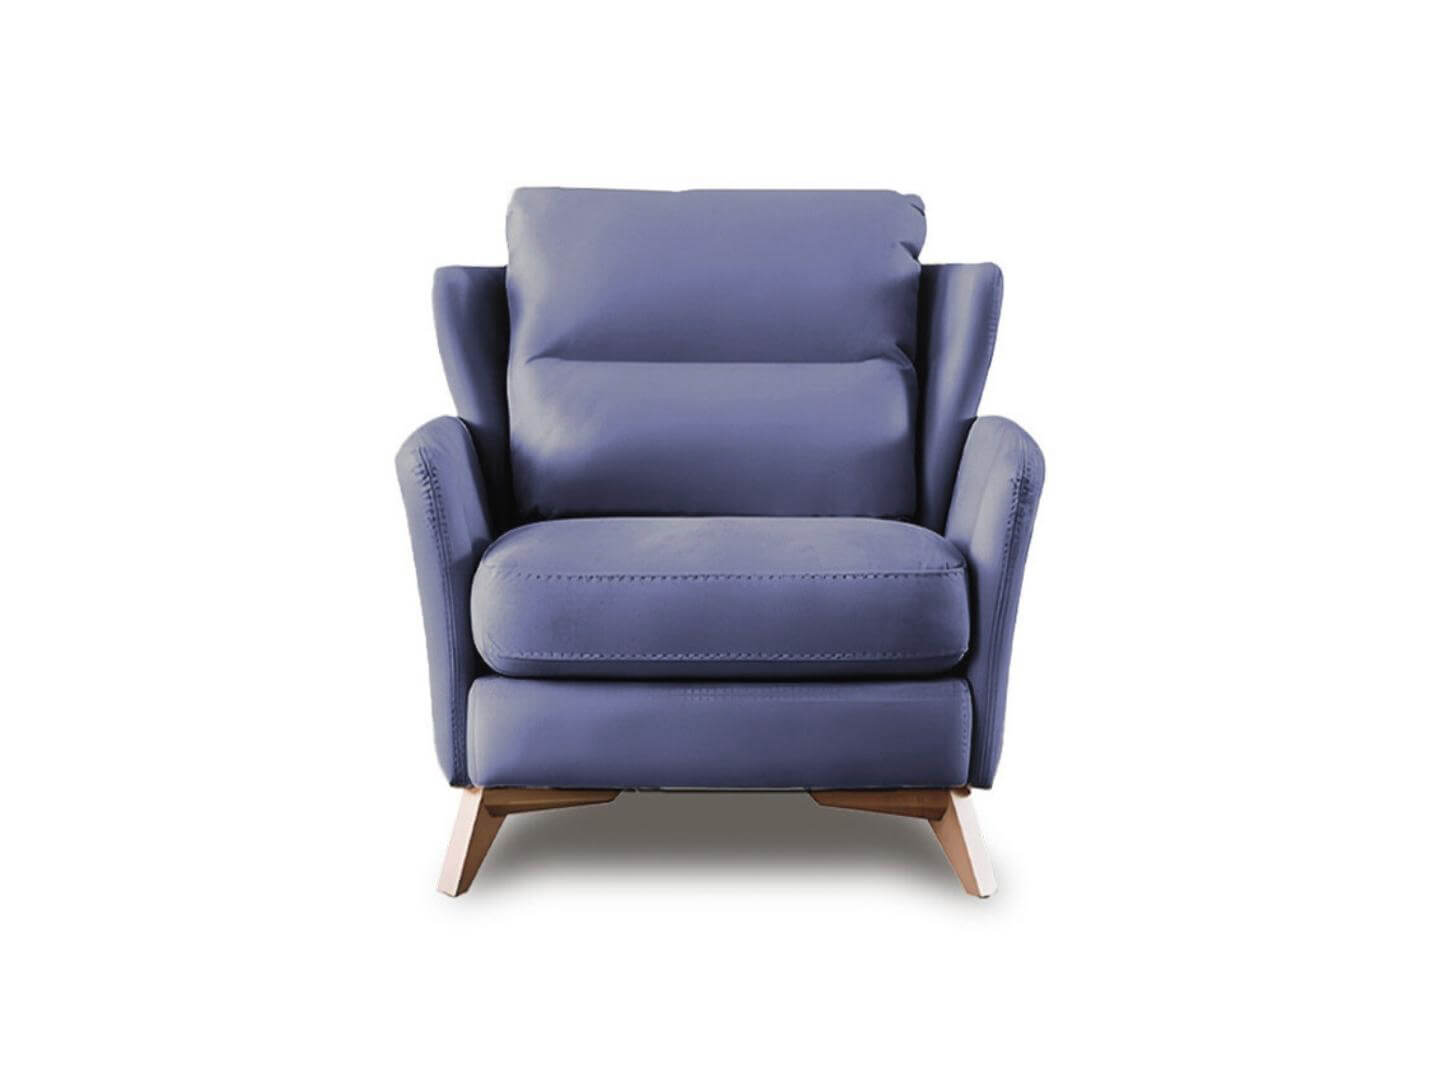 variant armchair blue - Lux Furniture